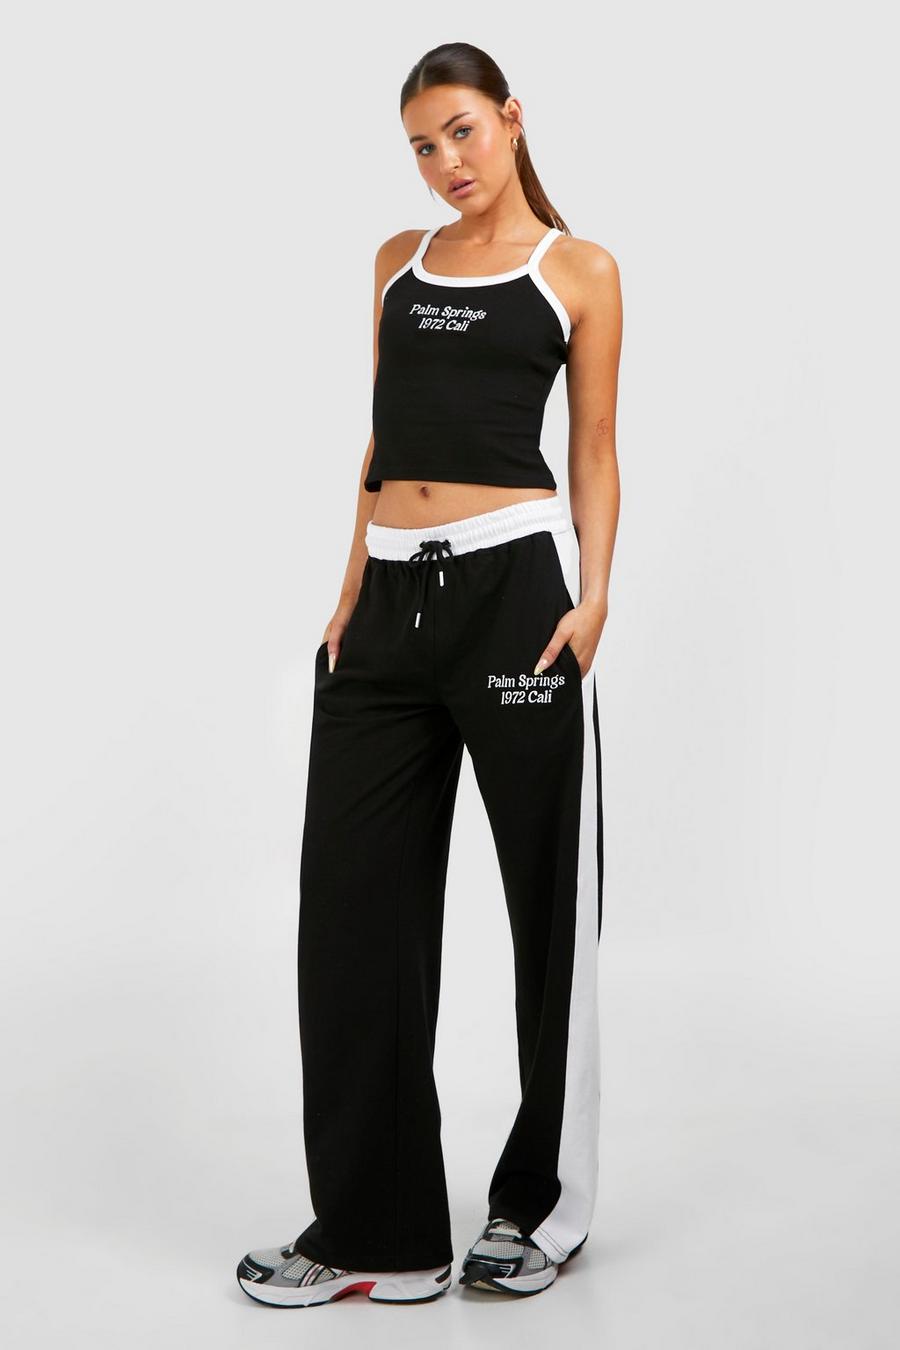 Black Palm Springs Contrast Printed Tank Top And Track Pants Set image number 1